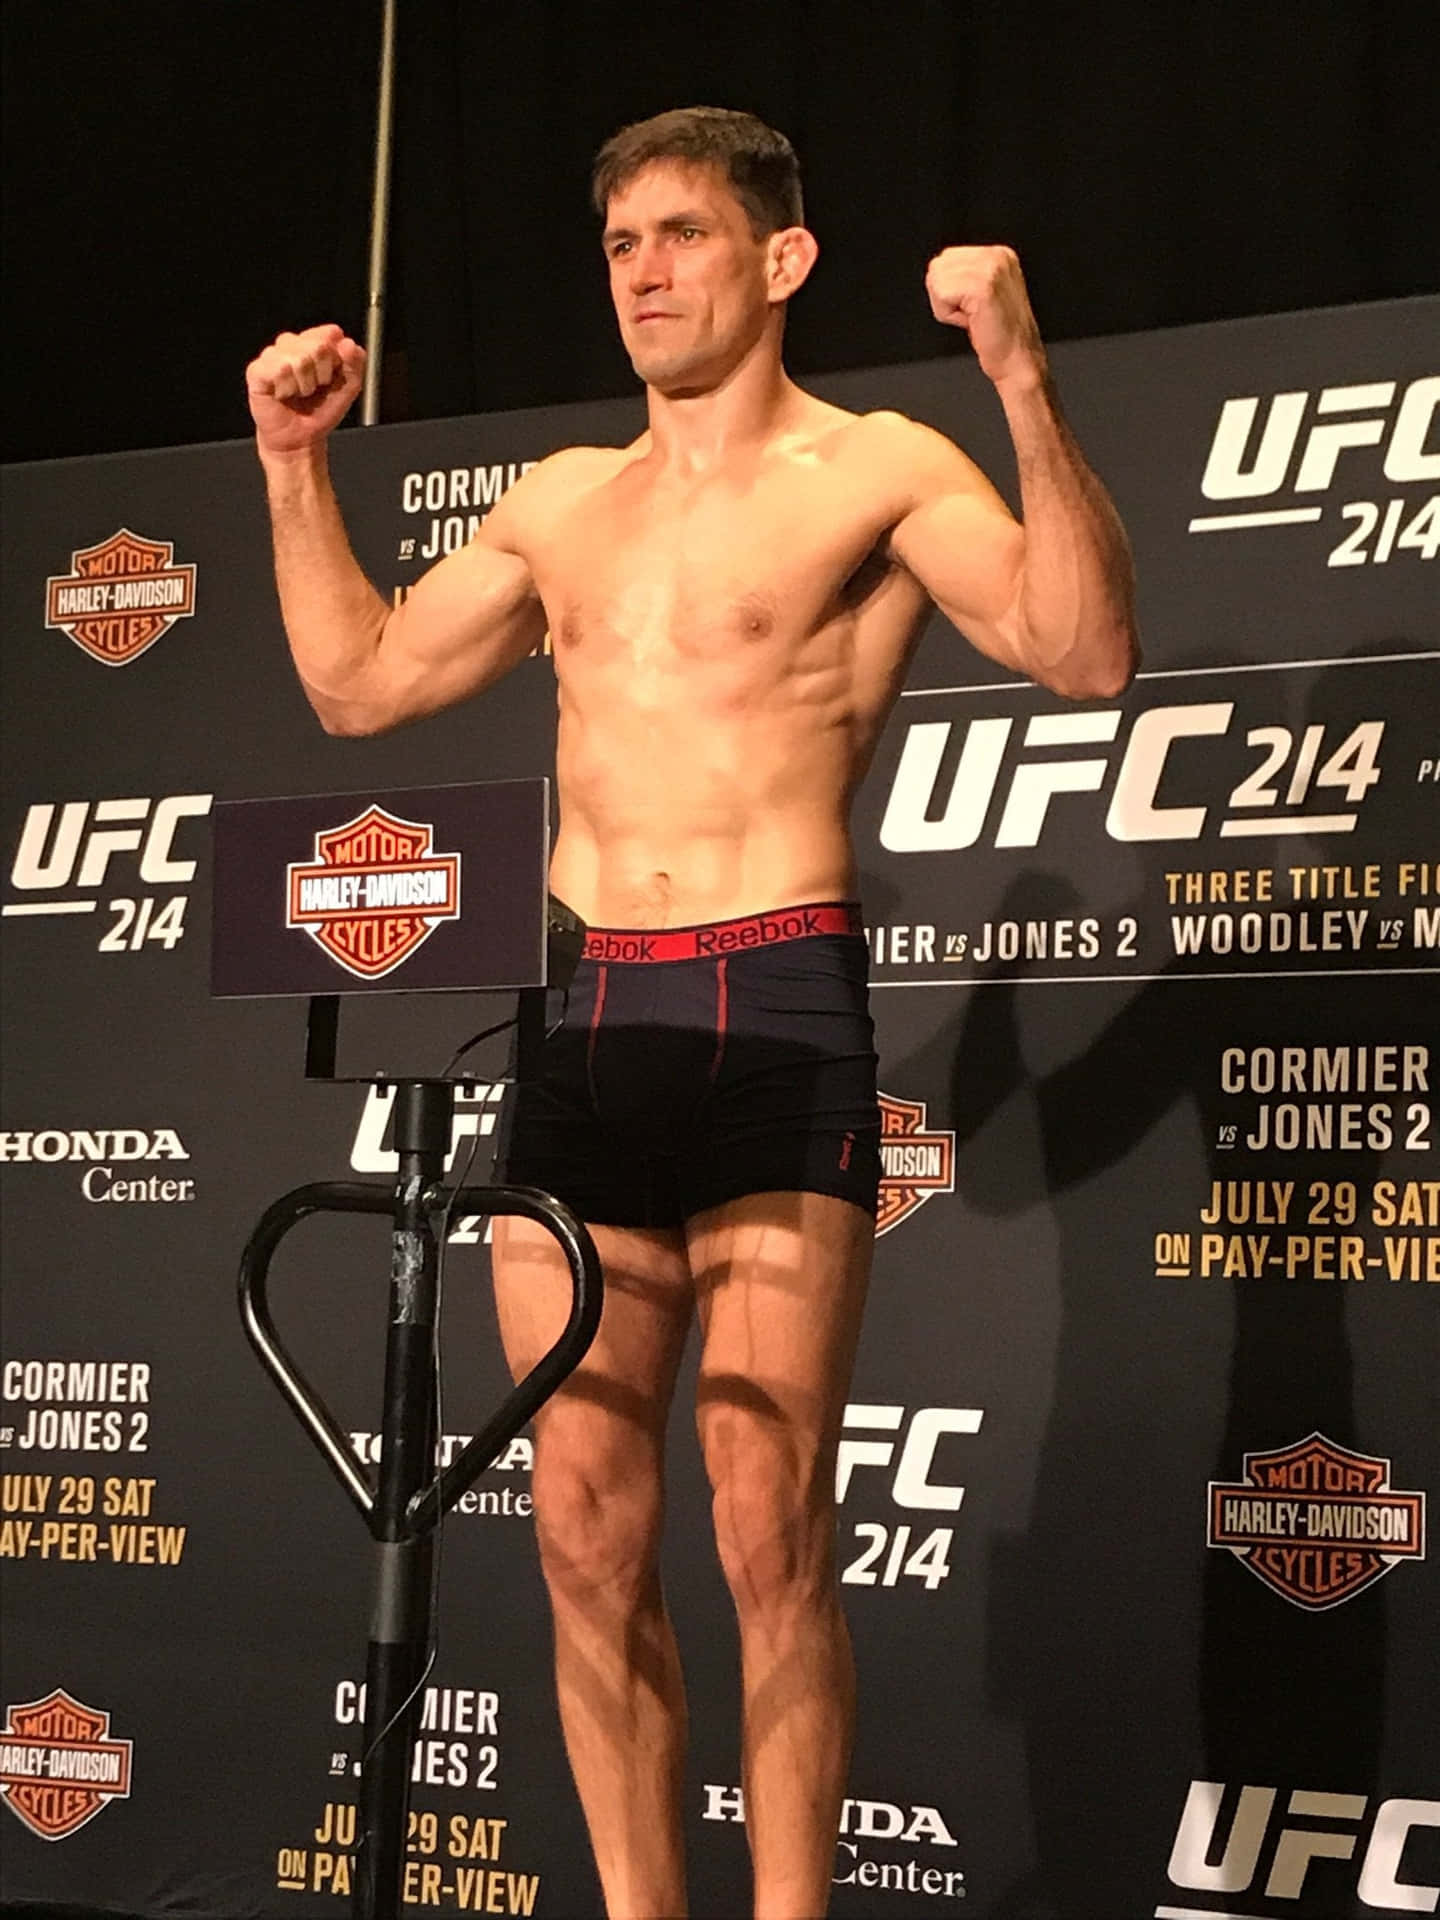 Demian Maia Ufc Ceremonial Weigh-in. Background